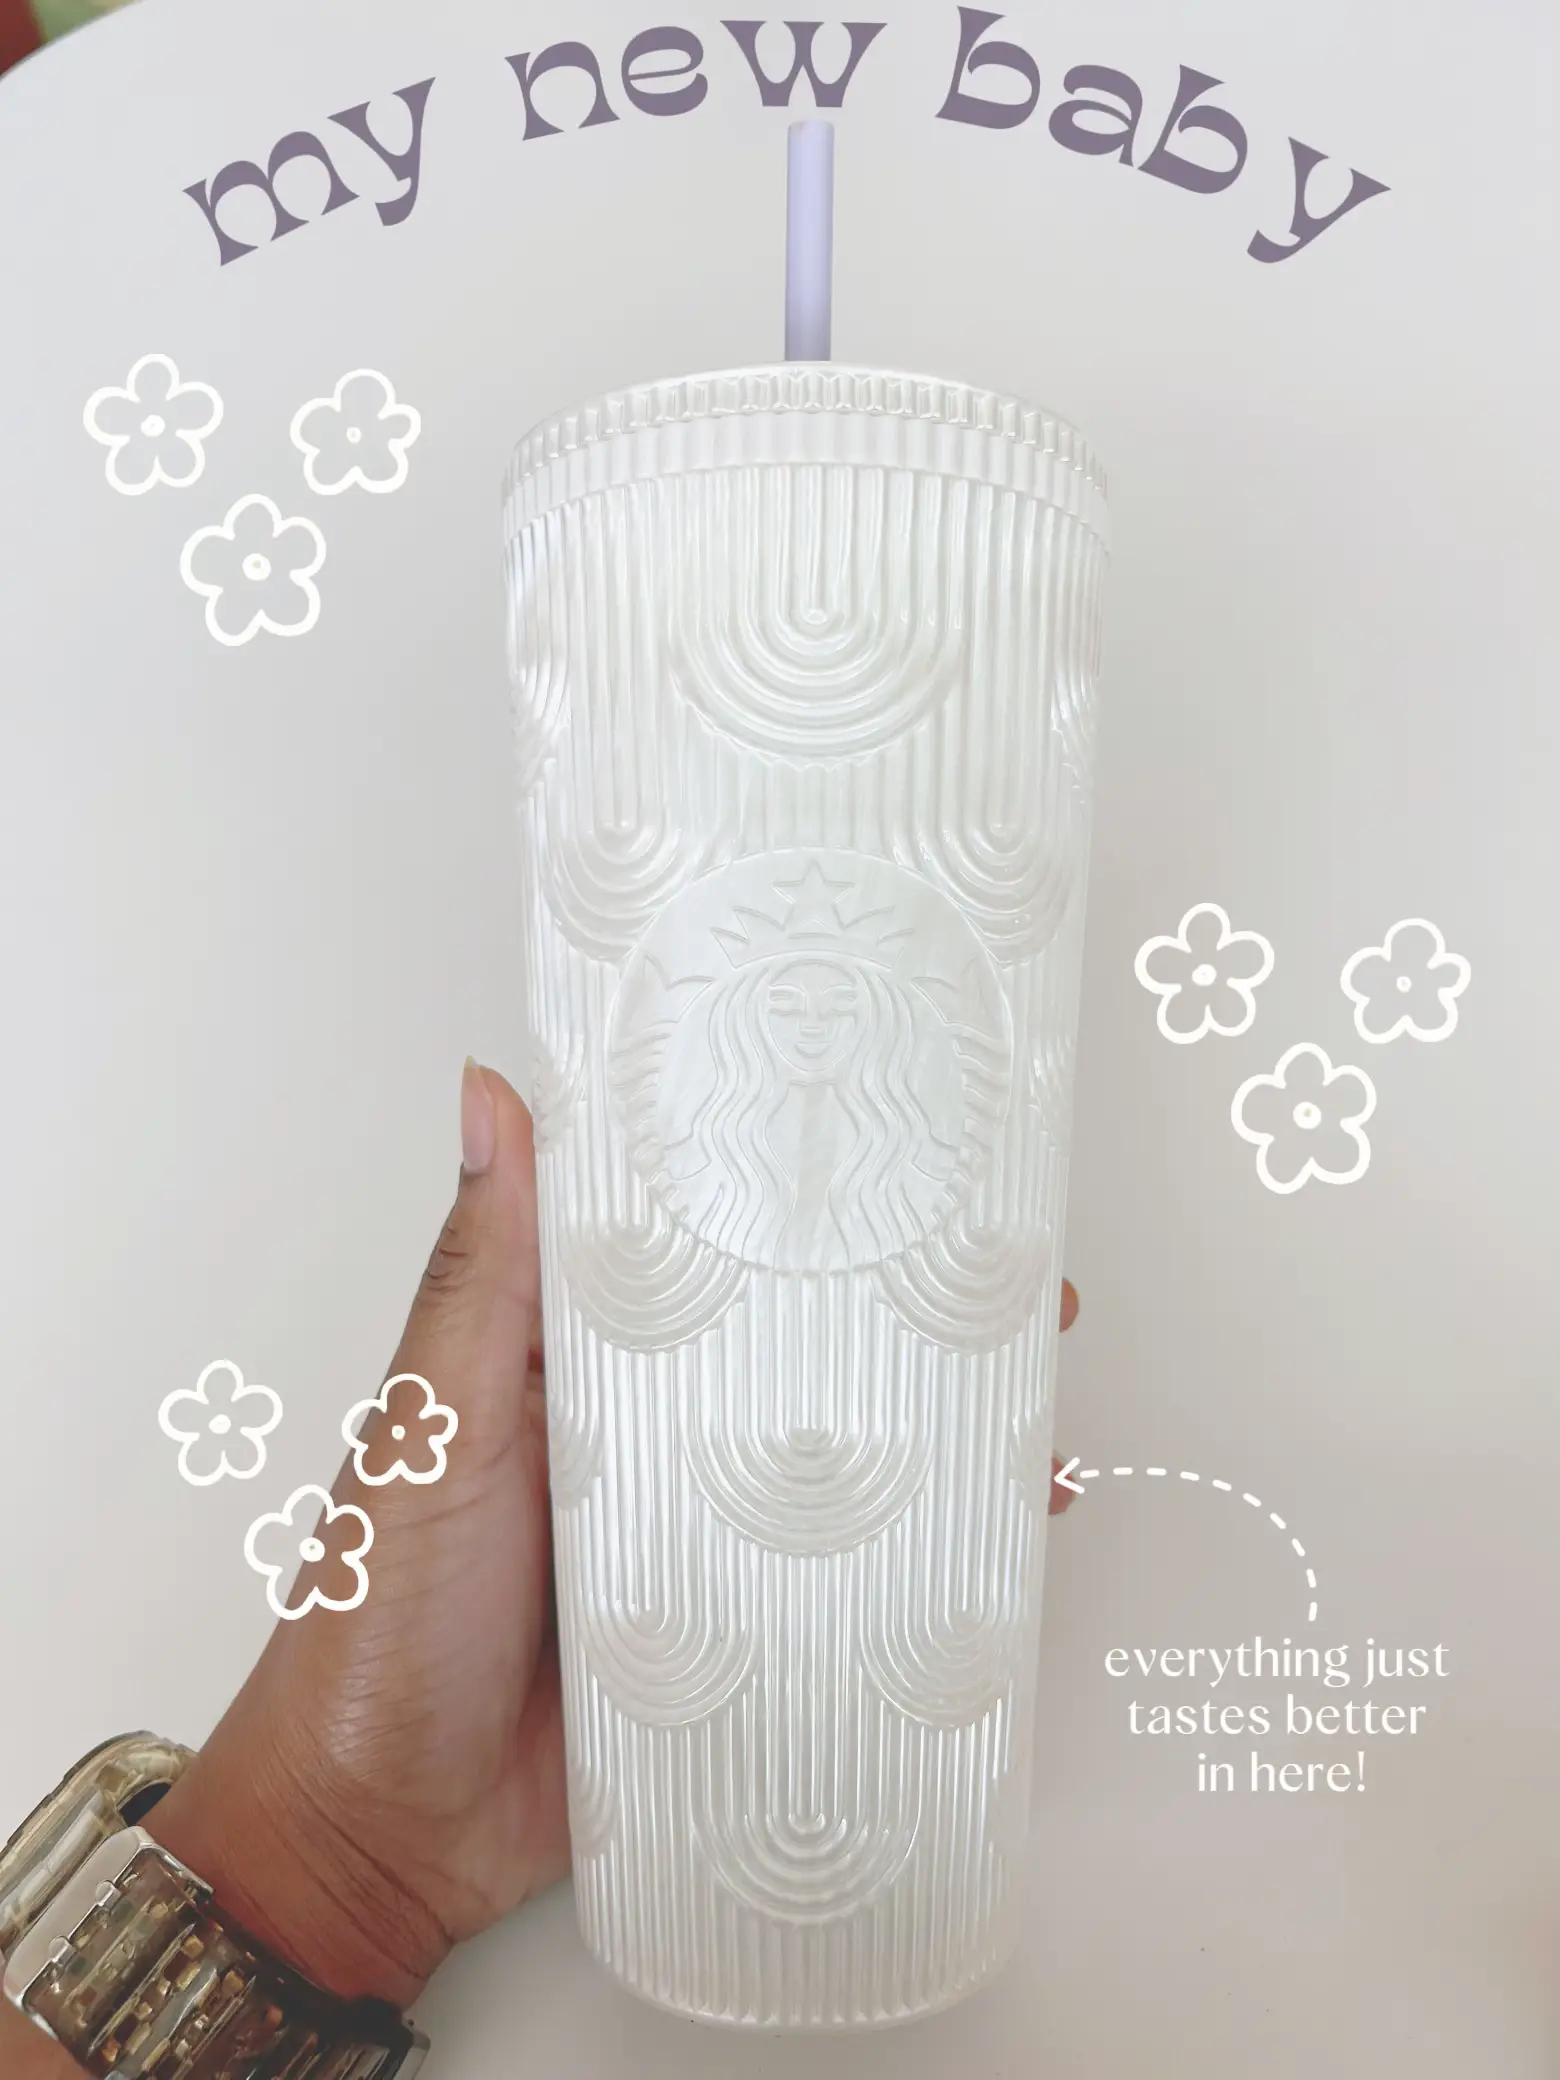 Starbucks' recycled glass cup for spring 2023 is viral on TikTok